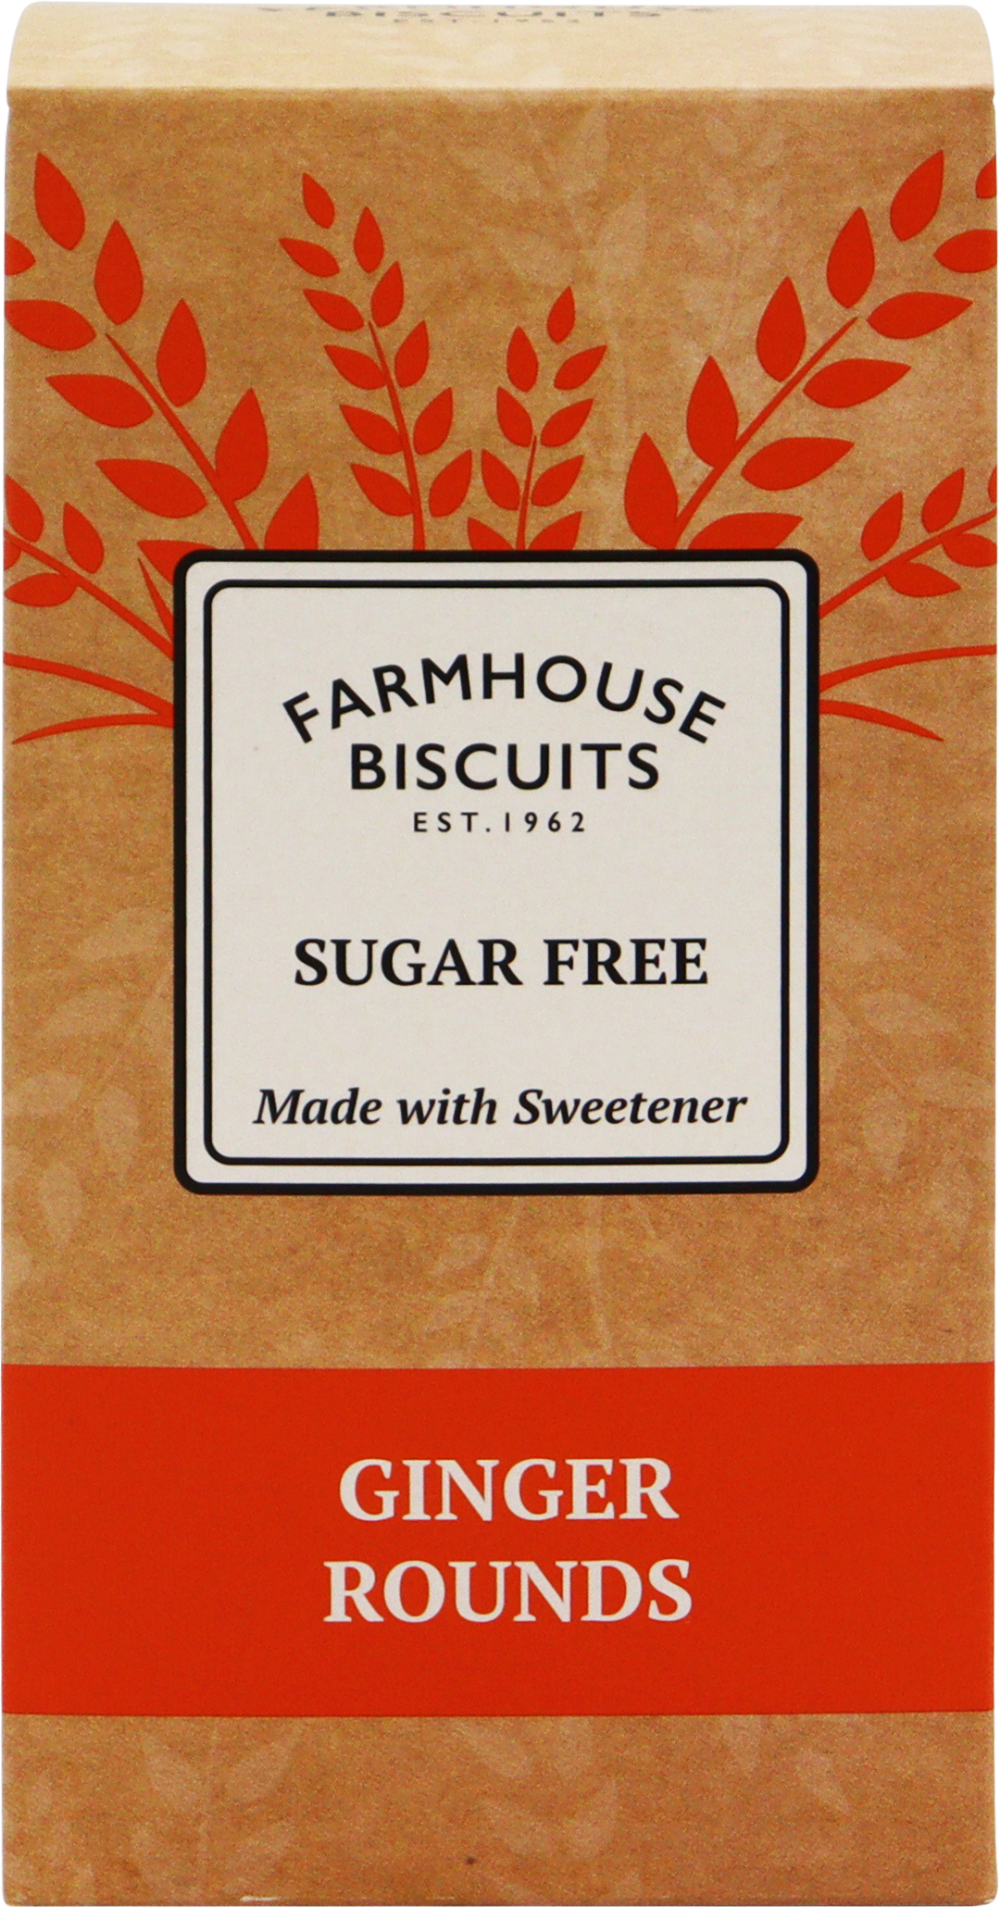 FARMHOUSE Sugar Free Ginger Rounds 150g